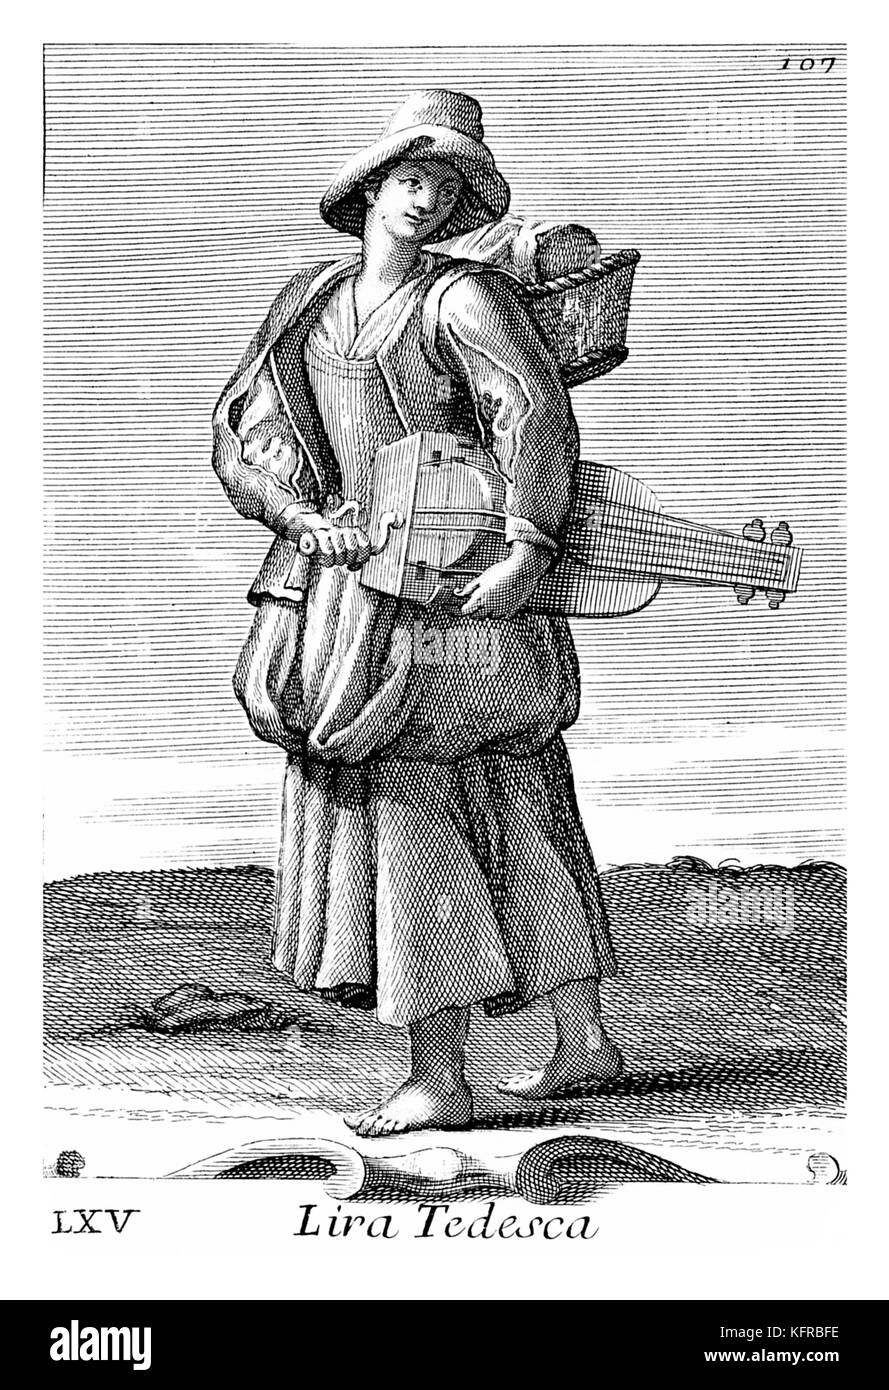 Woman playing a hurdy-gurdy - stringed musical instrument that produces sound by a wheel rubbing against the strings. Illustration from Filippo Bonanni's  'Gabinetto Armonico'  published in 1723, Illustration 65. Engraving by Arnold van Westerhout. Caption reads Lira Tedesca. Stock Photo